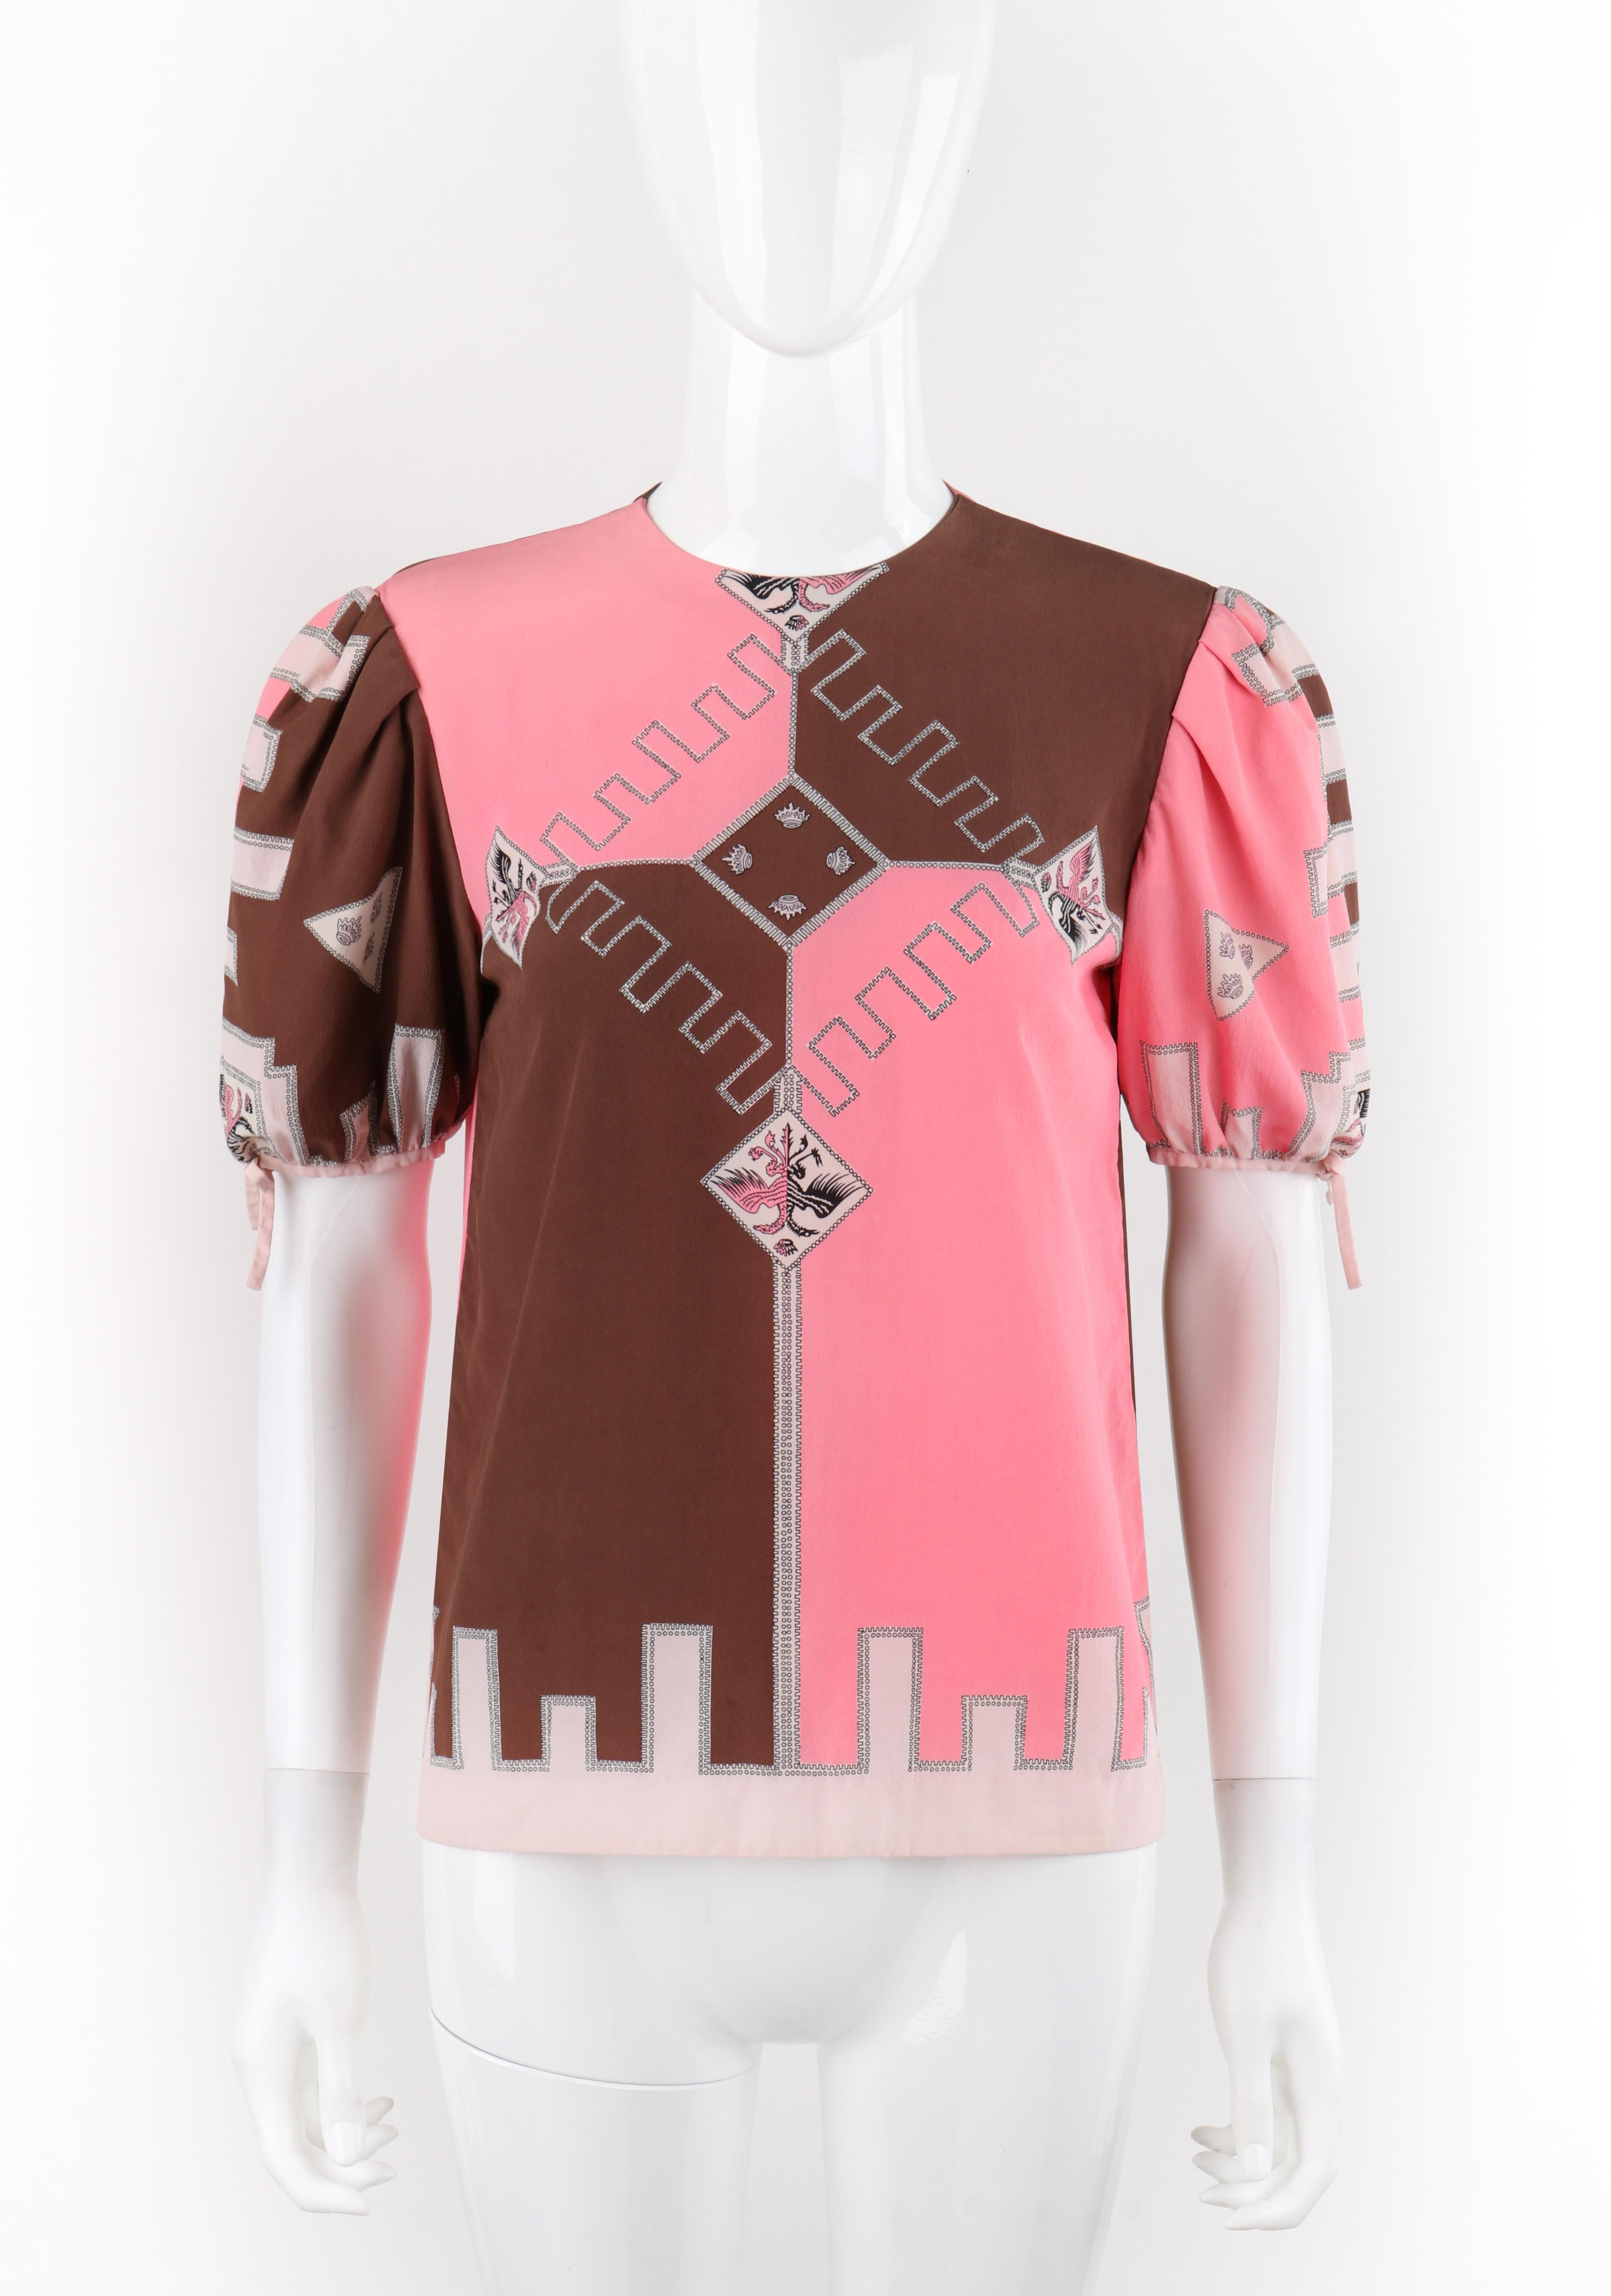 Brand / Manufacturer: Emilio Pucci
Circa: 1970s
Designer: Emilio Pucci 
Style: Blouse
Color(s): Shades of pink, brown, white, black
Lined: No
Marked Fabric Content: 